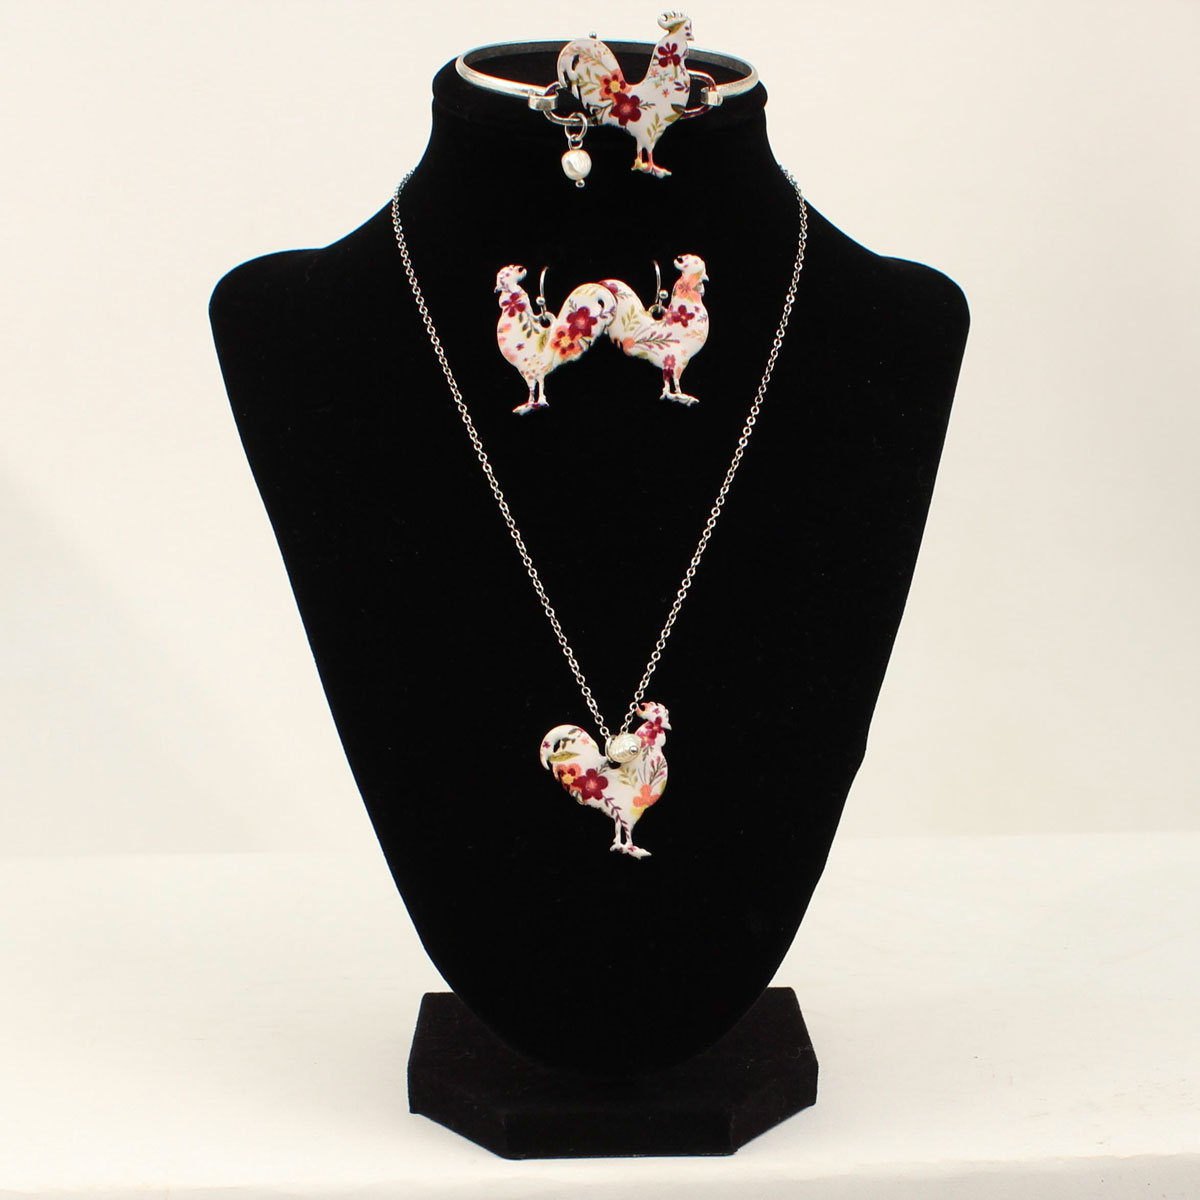 30946 Floral Rooster Pendant Necklace & Earrings Set - 3 Piece